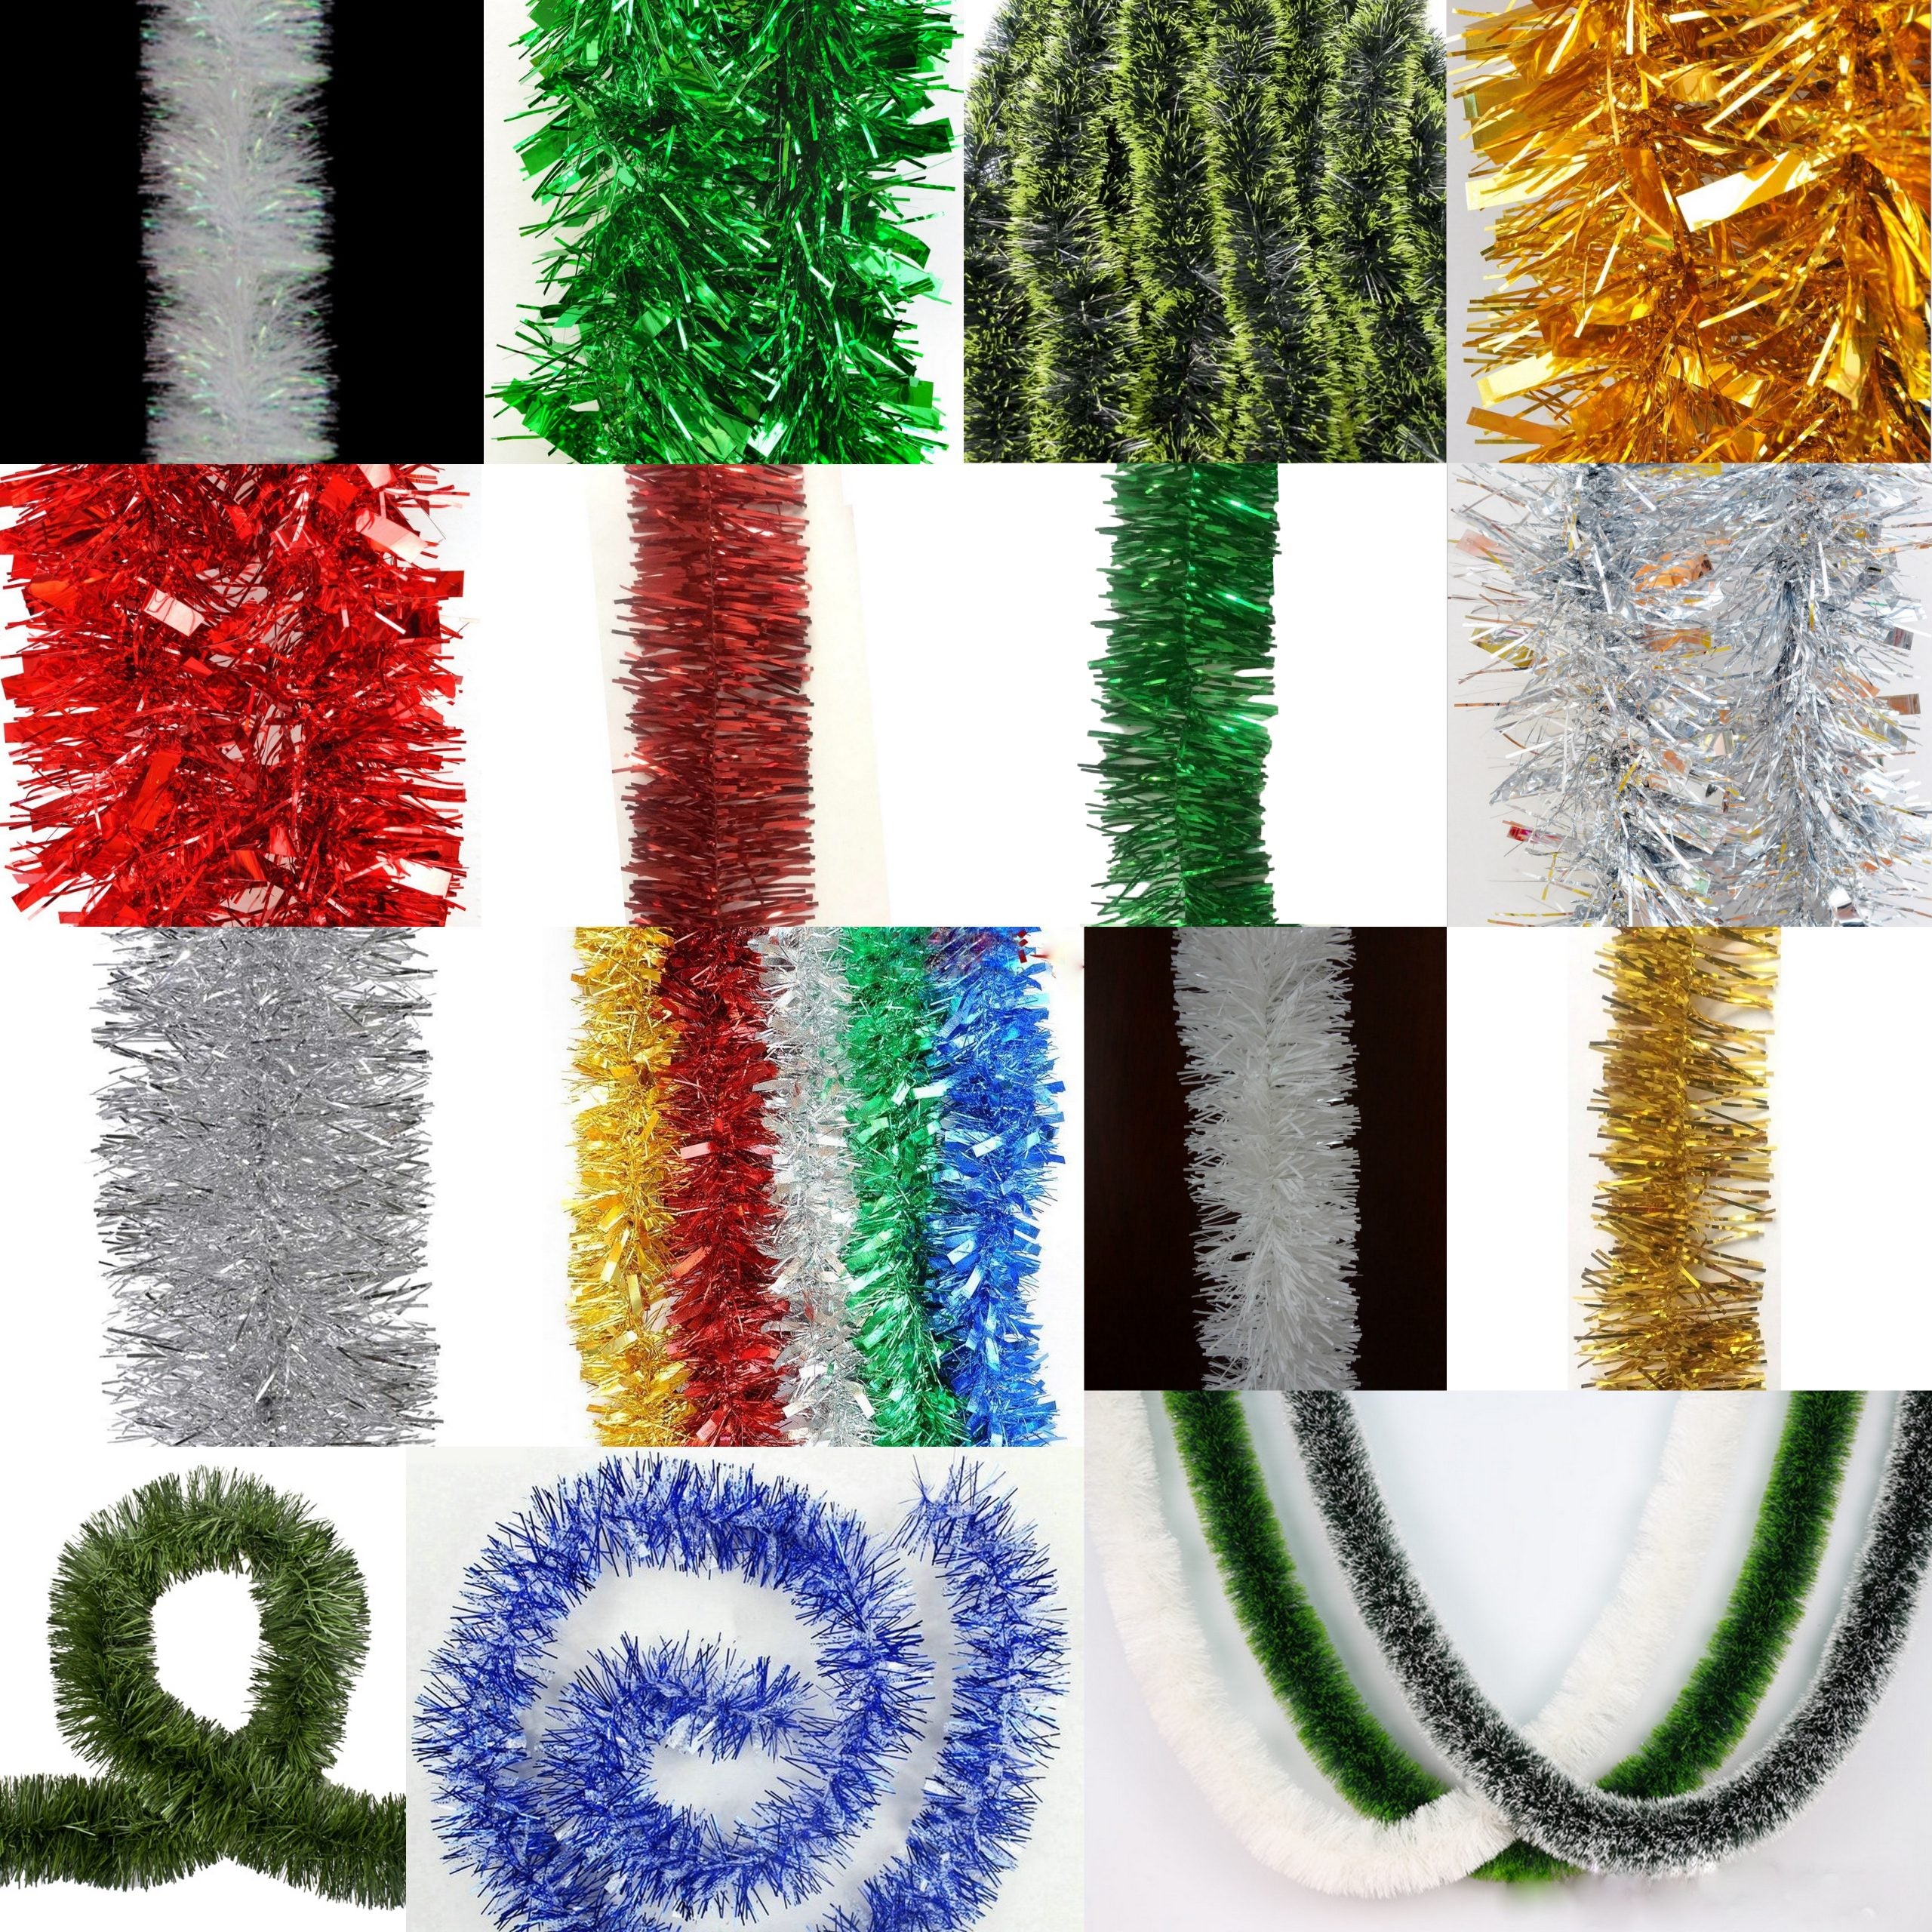 5x 2.5m Christmas Tinsel Xmas Garland Sparkly Snowflake Party Natural Home Décor, White Pearlescent - SILBERSHELL